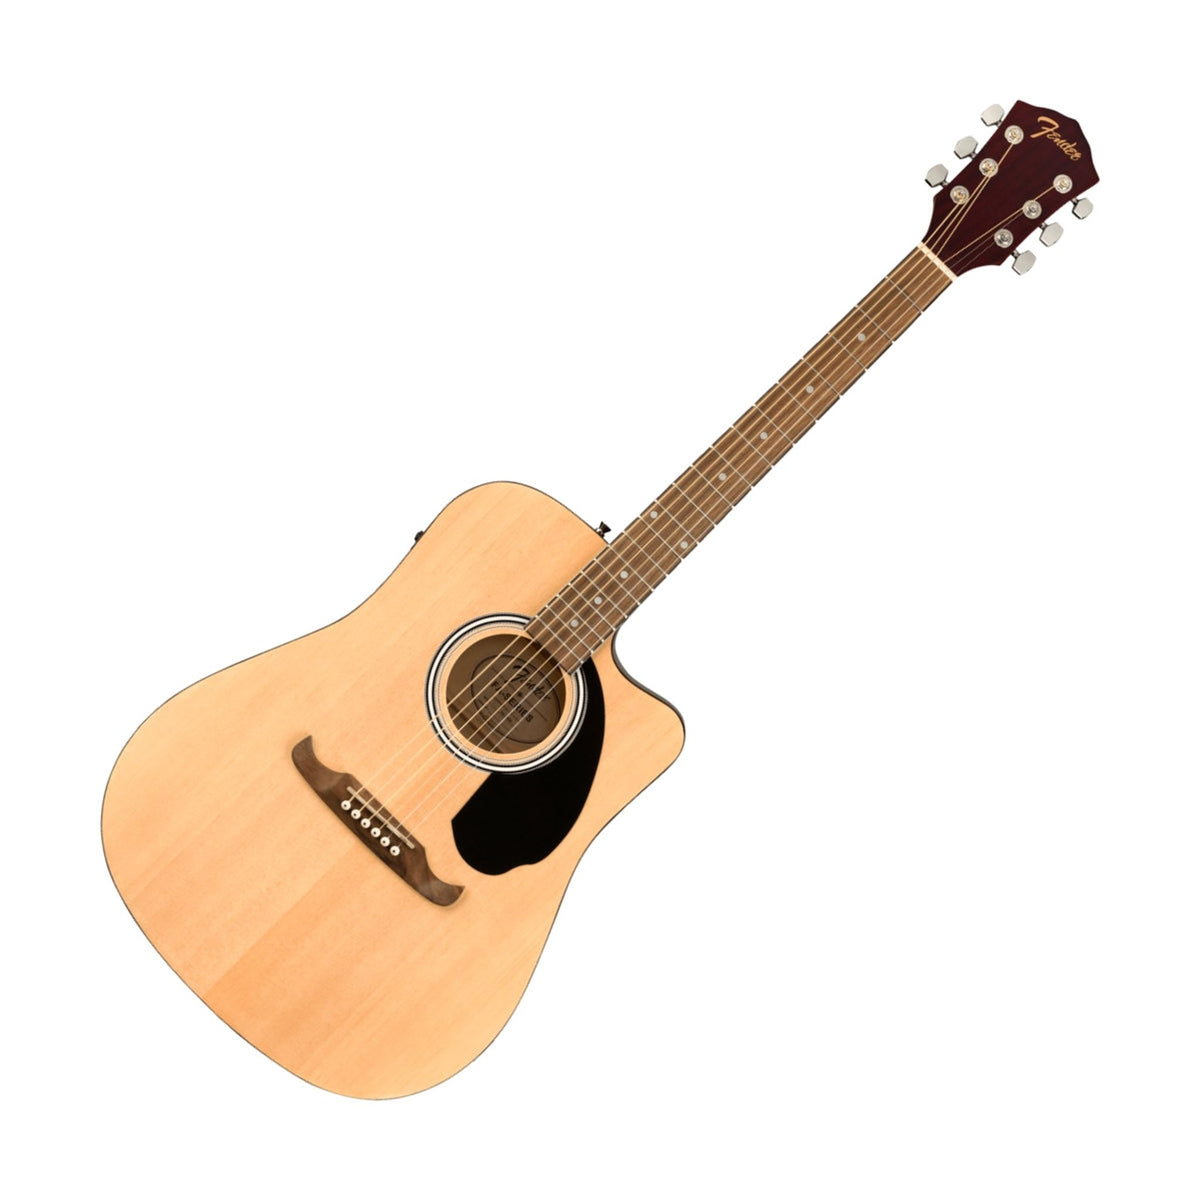 The Fender FA-125CE Accoustic-Electric combines Fender tone and style with Fender FE-A2 electronics for a guitar that was made to take the stage.